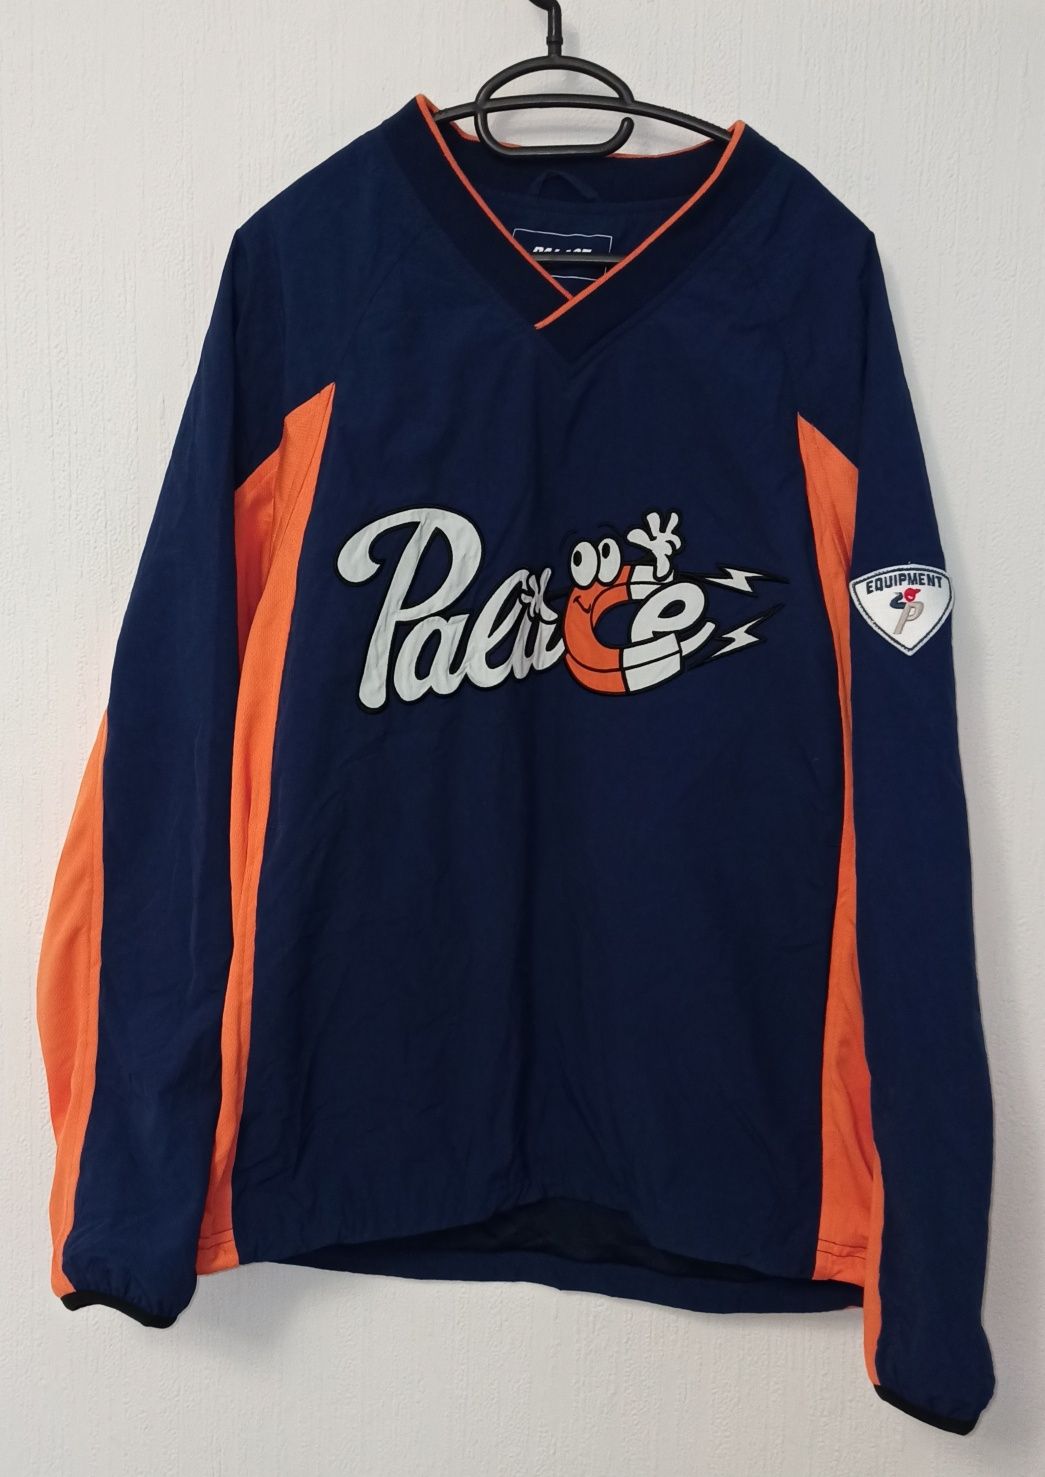 Palace skateboards shell pullover